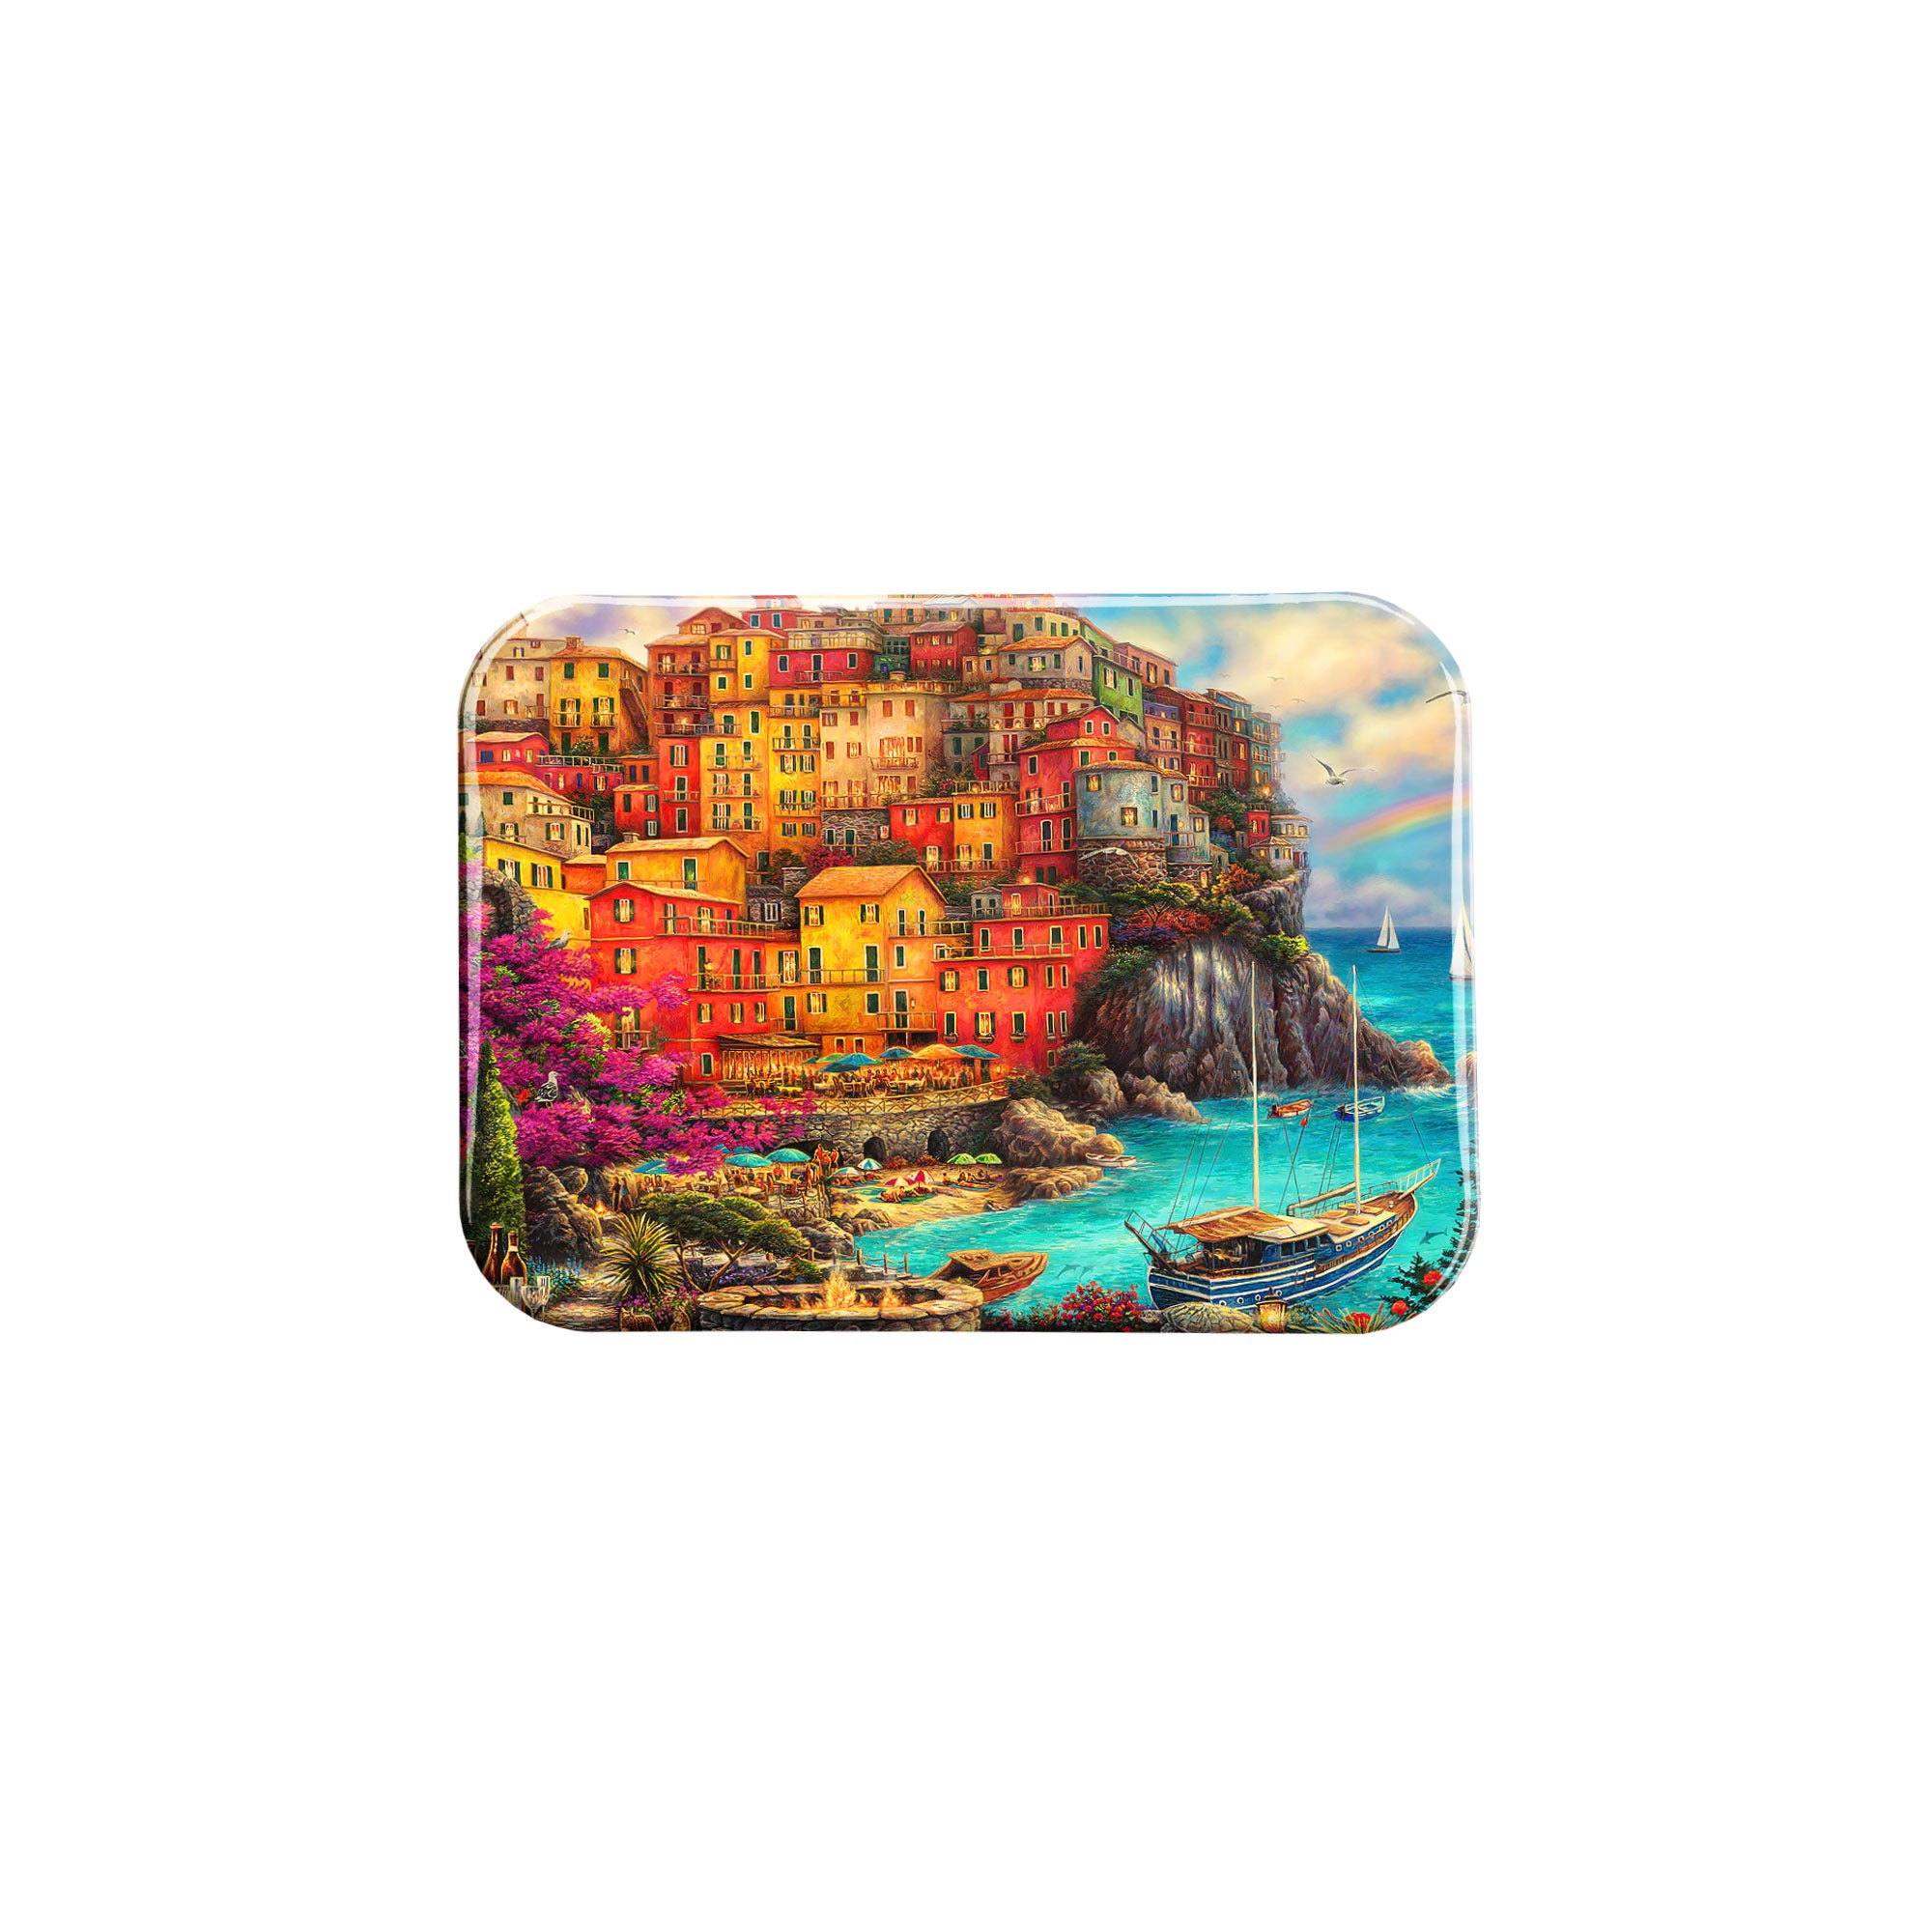 "A Beautiful Day At Cinque Terre" - 2.5" X 3.5" Rectangle Fridge Magnets